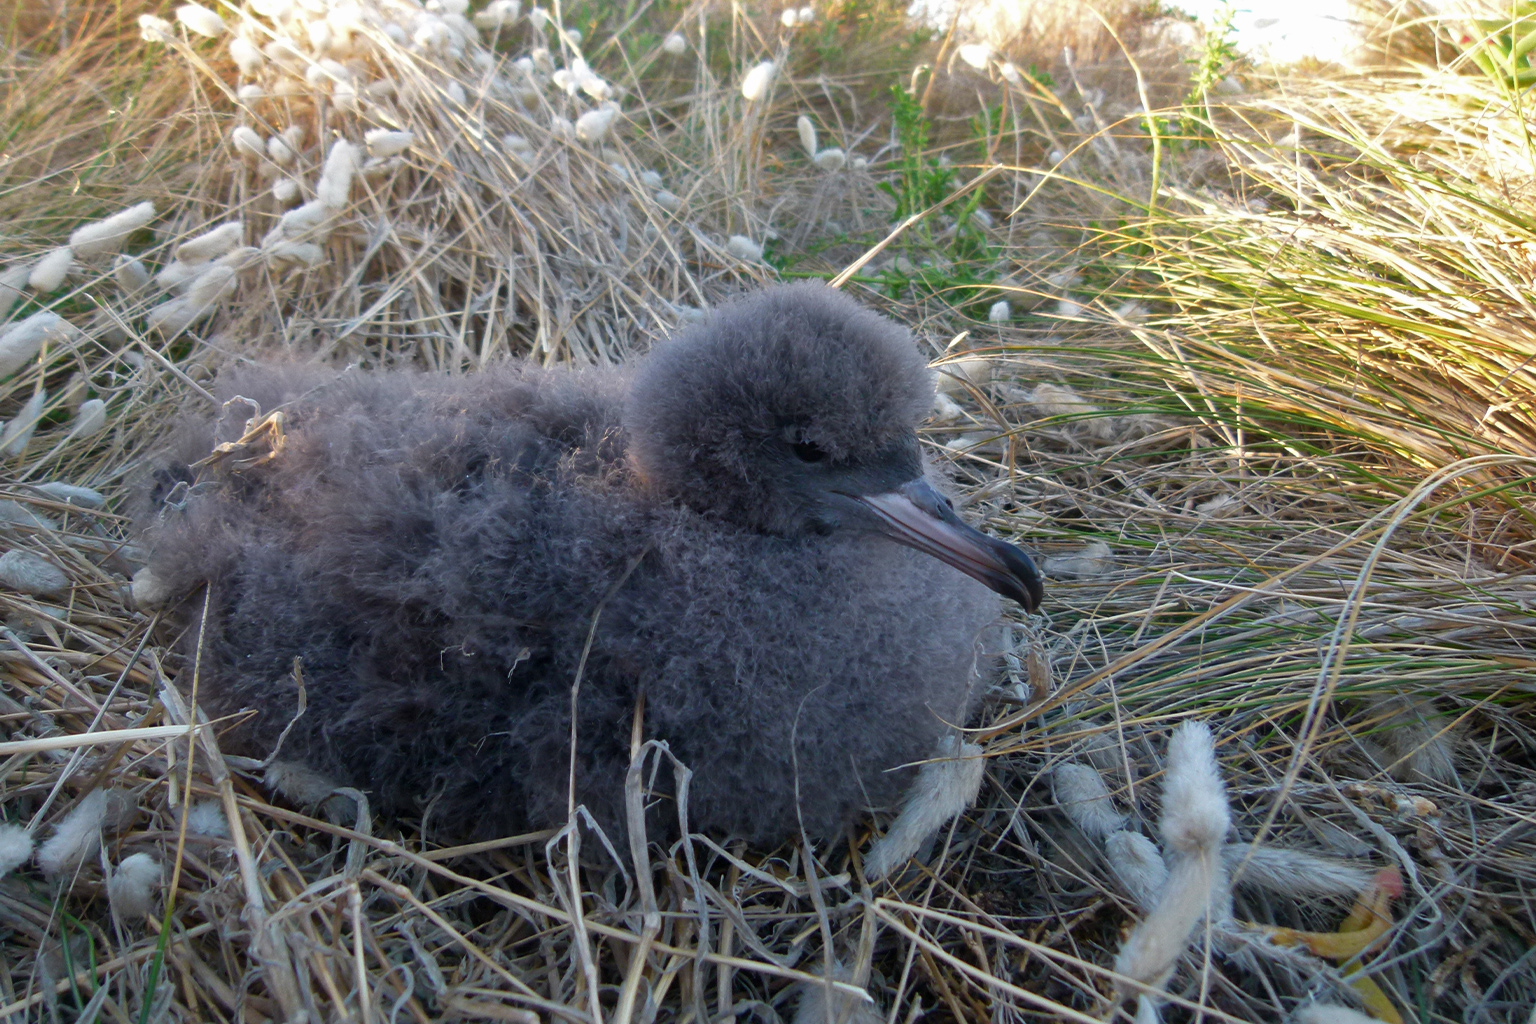 A flesh-footed shearwater fledgling.